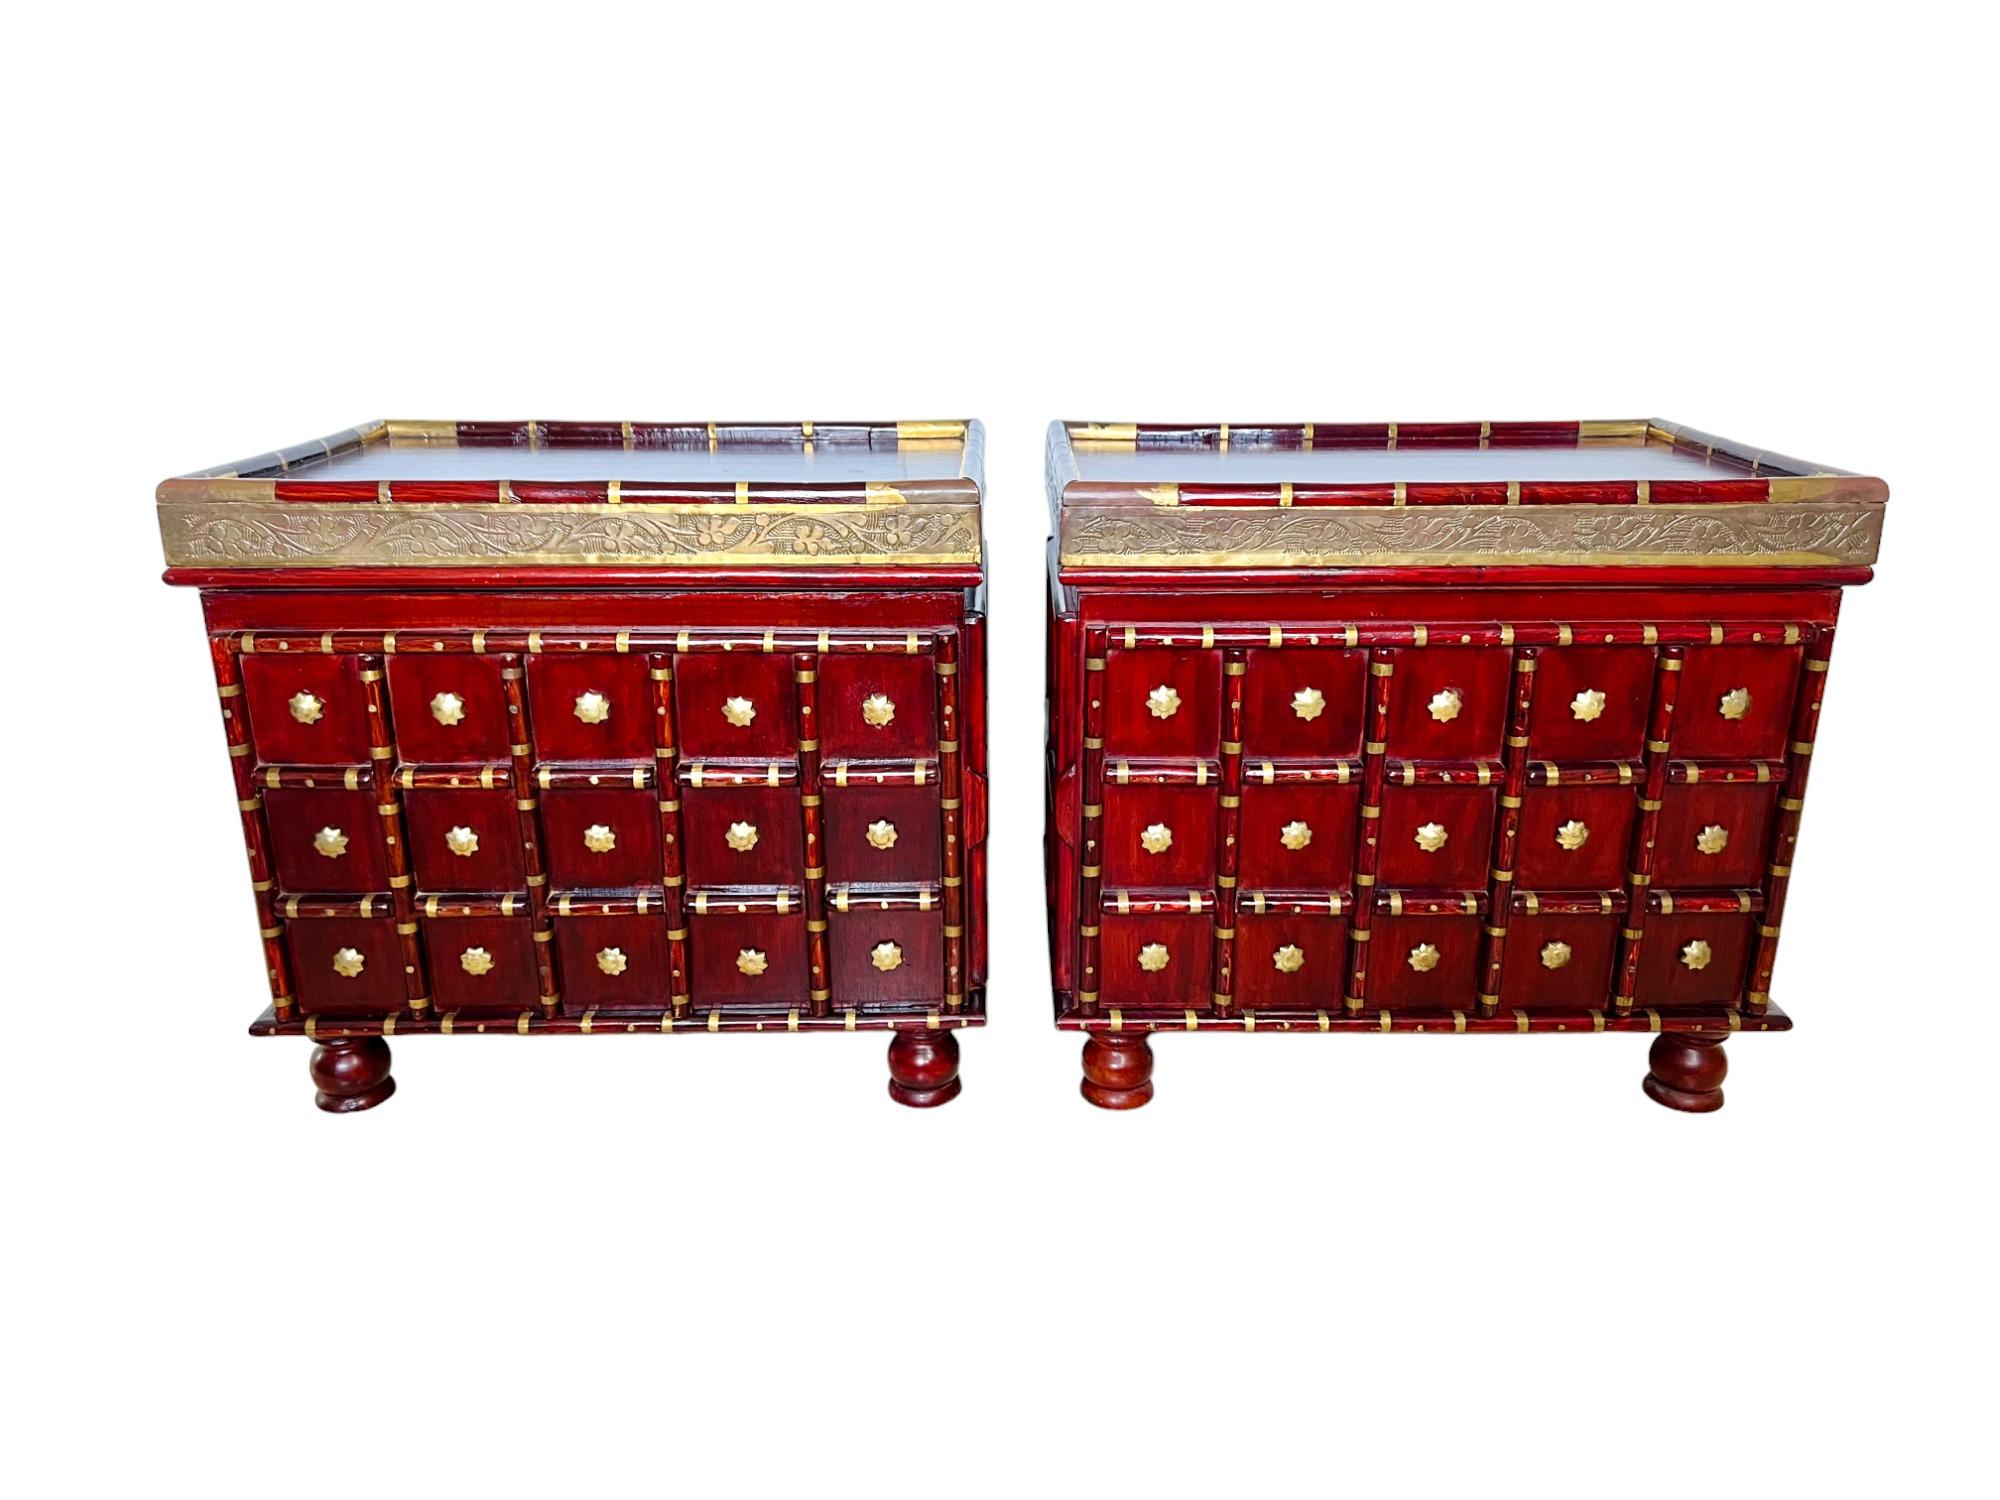 An interesting and finely crafted pair of mid 20th century Indo Asian brass clad side or end tables. Constructed of lacquered wood (likely mahogany and teak) and finished on all sides, they feature a lipped top edge, framed paneling and bun feet.